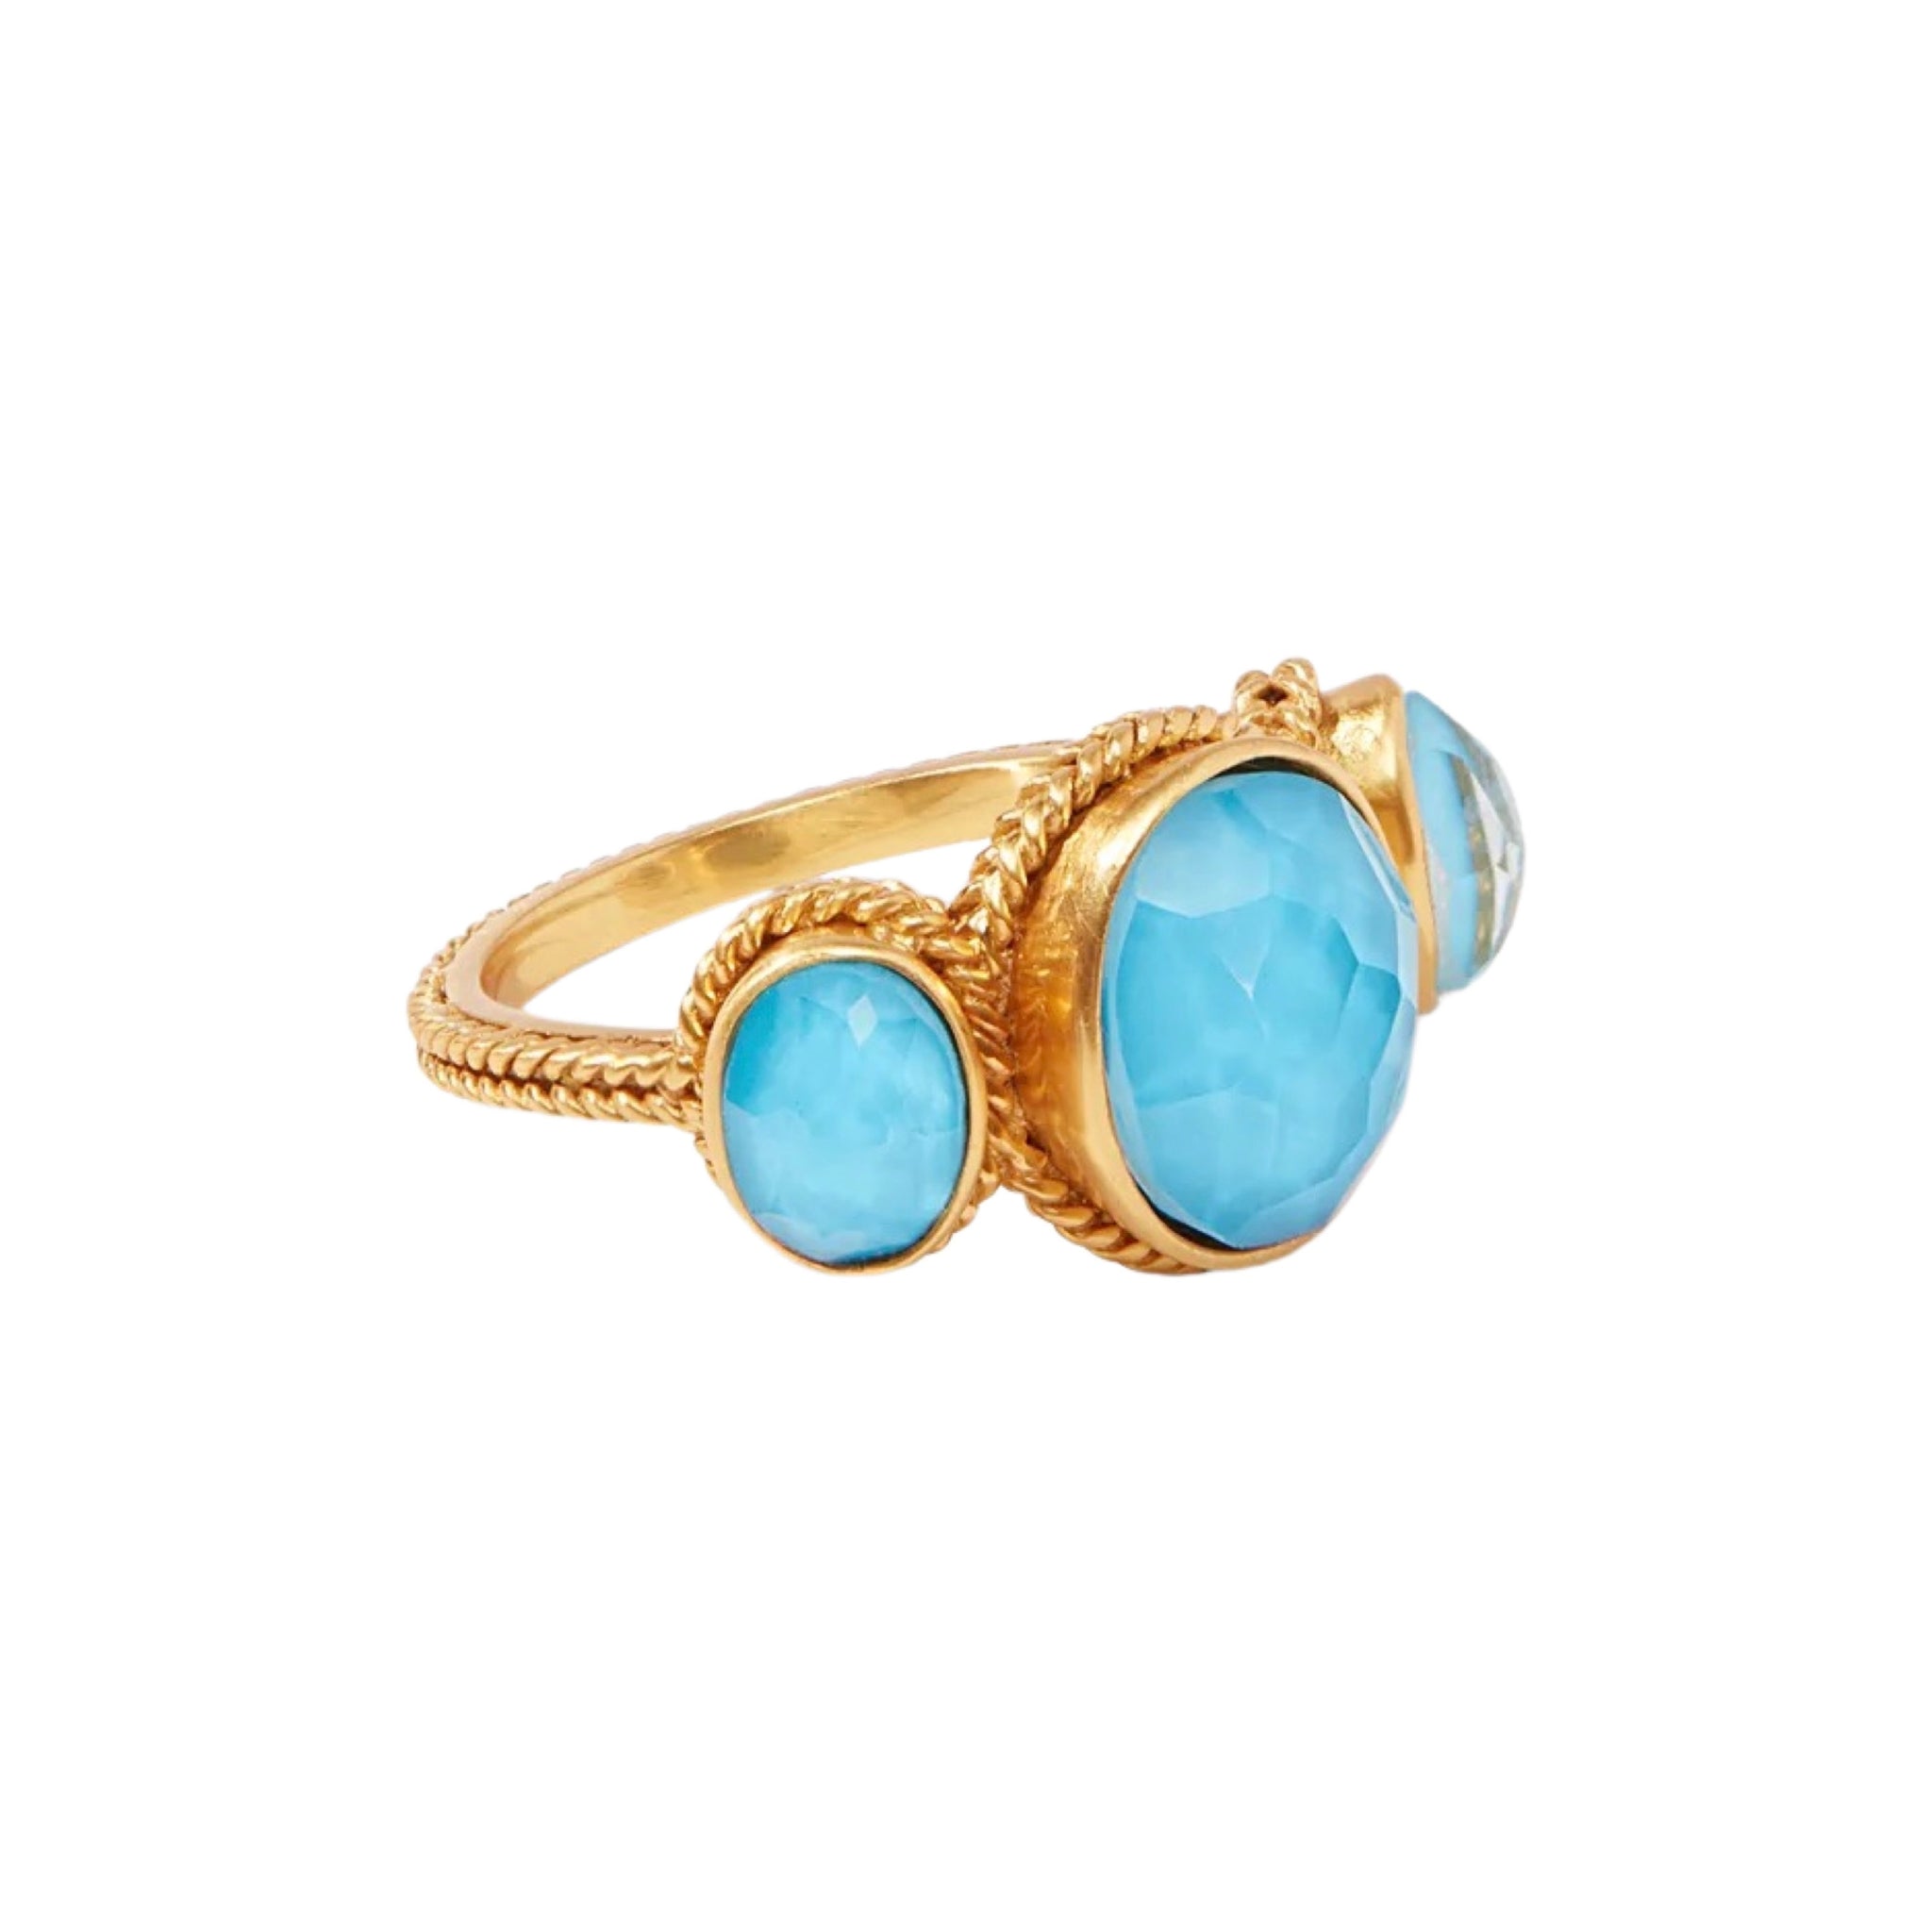 Julie Vos Calypso Ring is Available at Shaylula Jewlery & Gifts in Tarrytown, NY and online. This Julie Vos Calypso Ring features a  rose-cut oval gemstones of imported glass in an elegant chevron surround.  • 24K gold plate, iridescent pacific blue mother of pearl doublet • Size 7